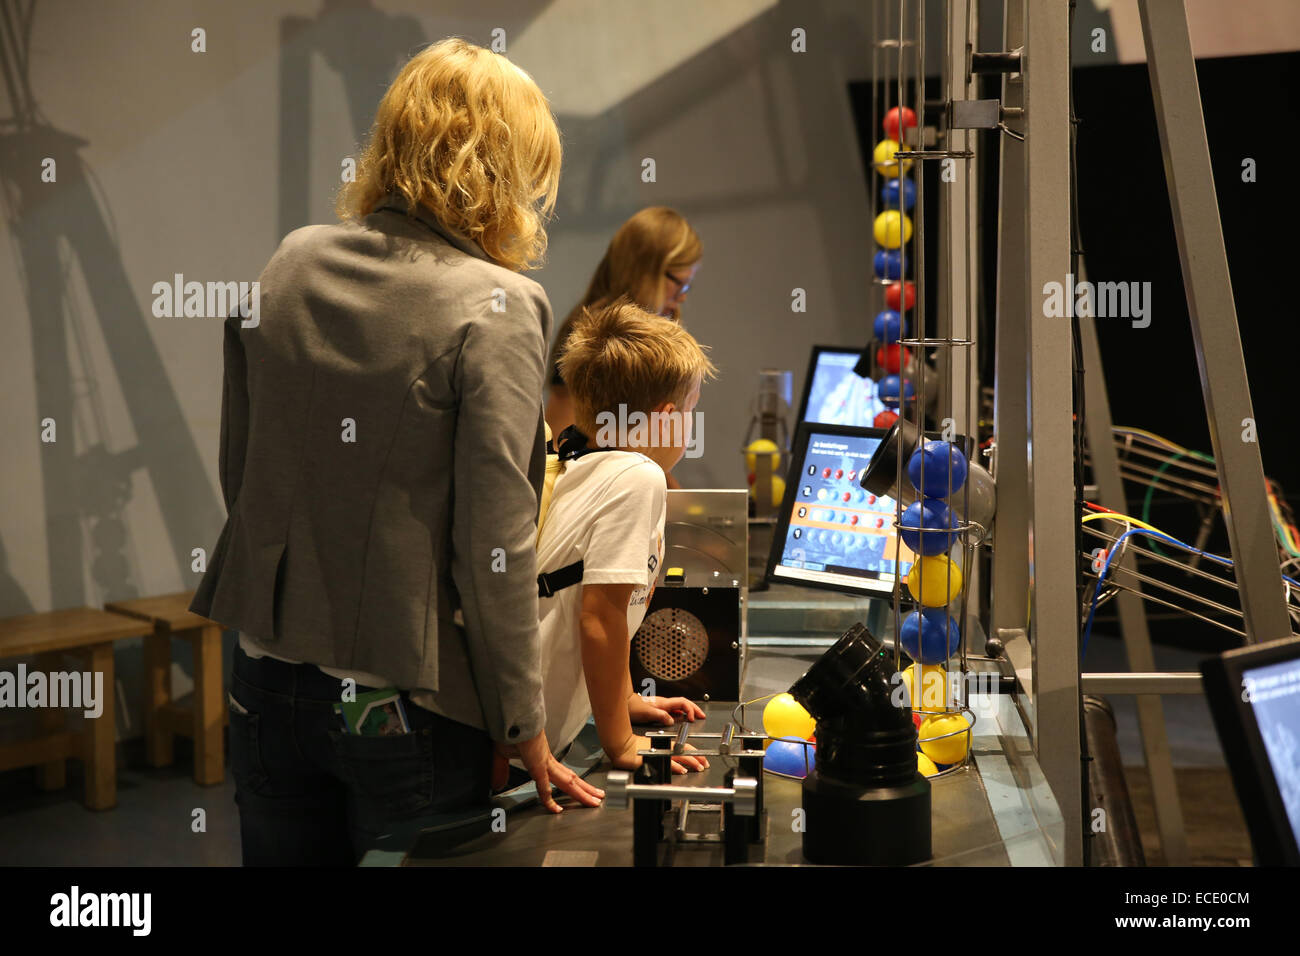 young boy watching screen inside Nemo science centre center Stock Photo